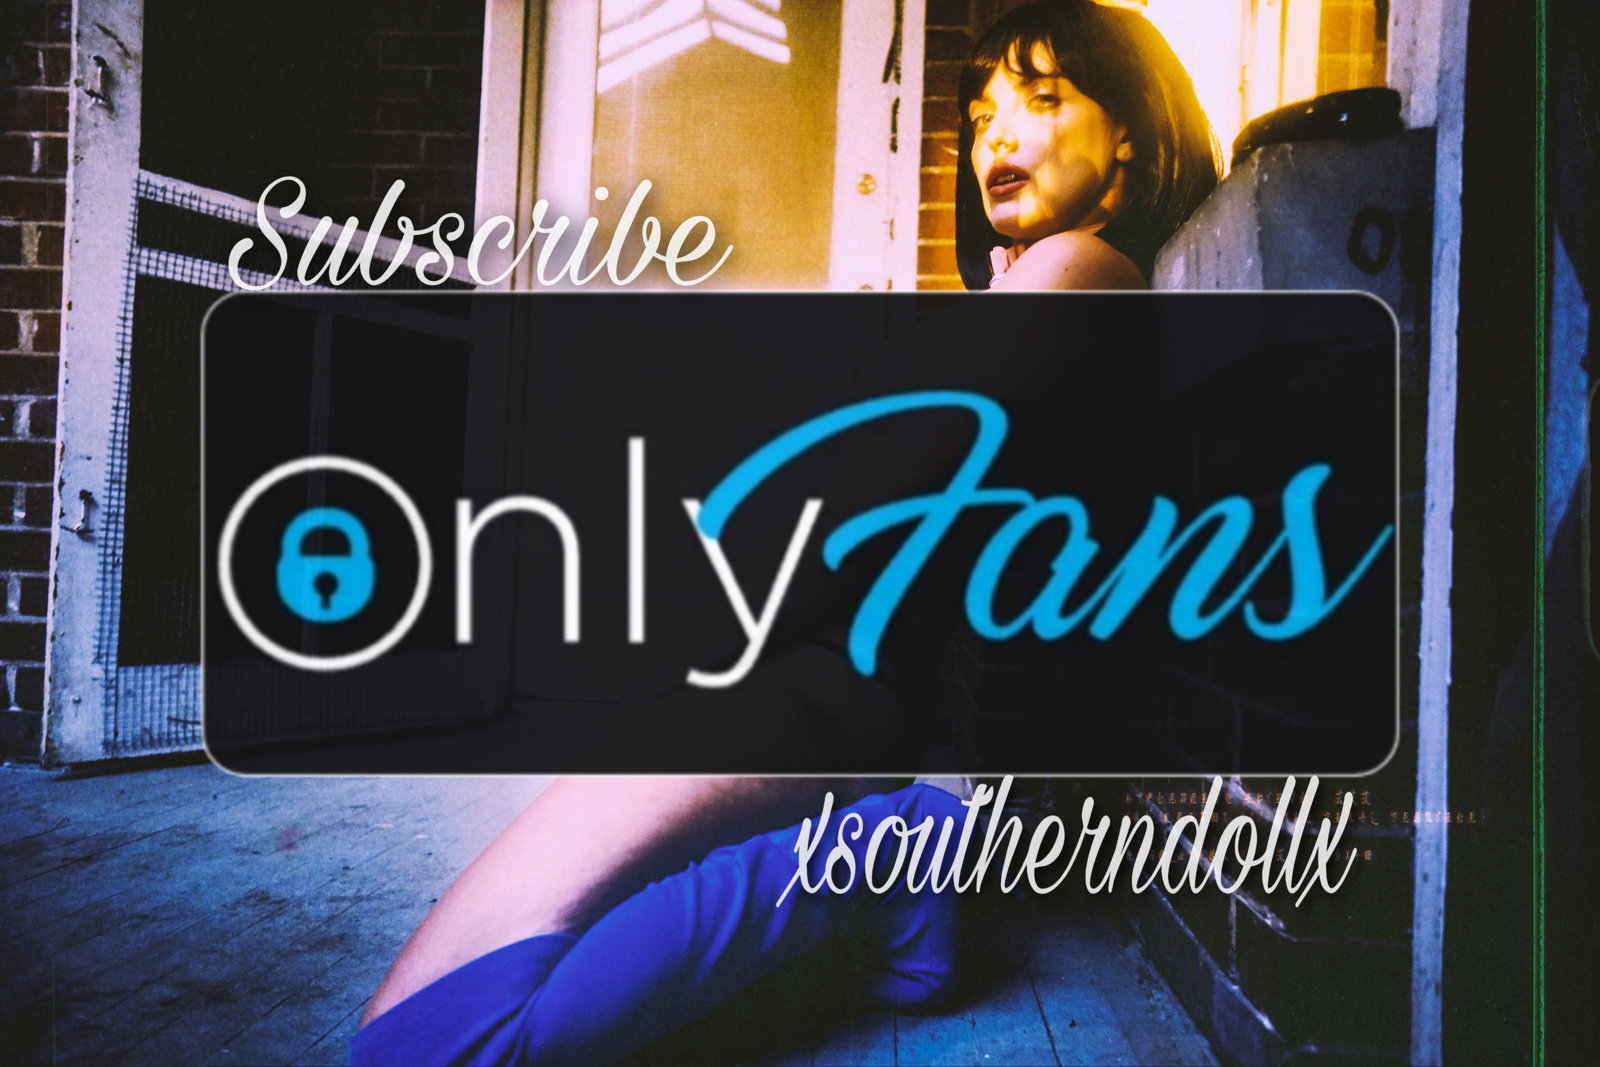 Watch the Photo by xsoutherndollx with the username @xsoutherndollx, who is a star user, posted on September 5, 2020 and the text says 'https://onlyfans.com/xsoutherndollx'